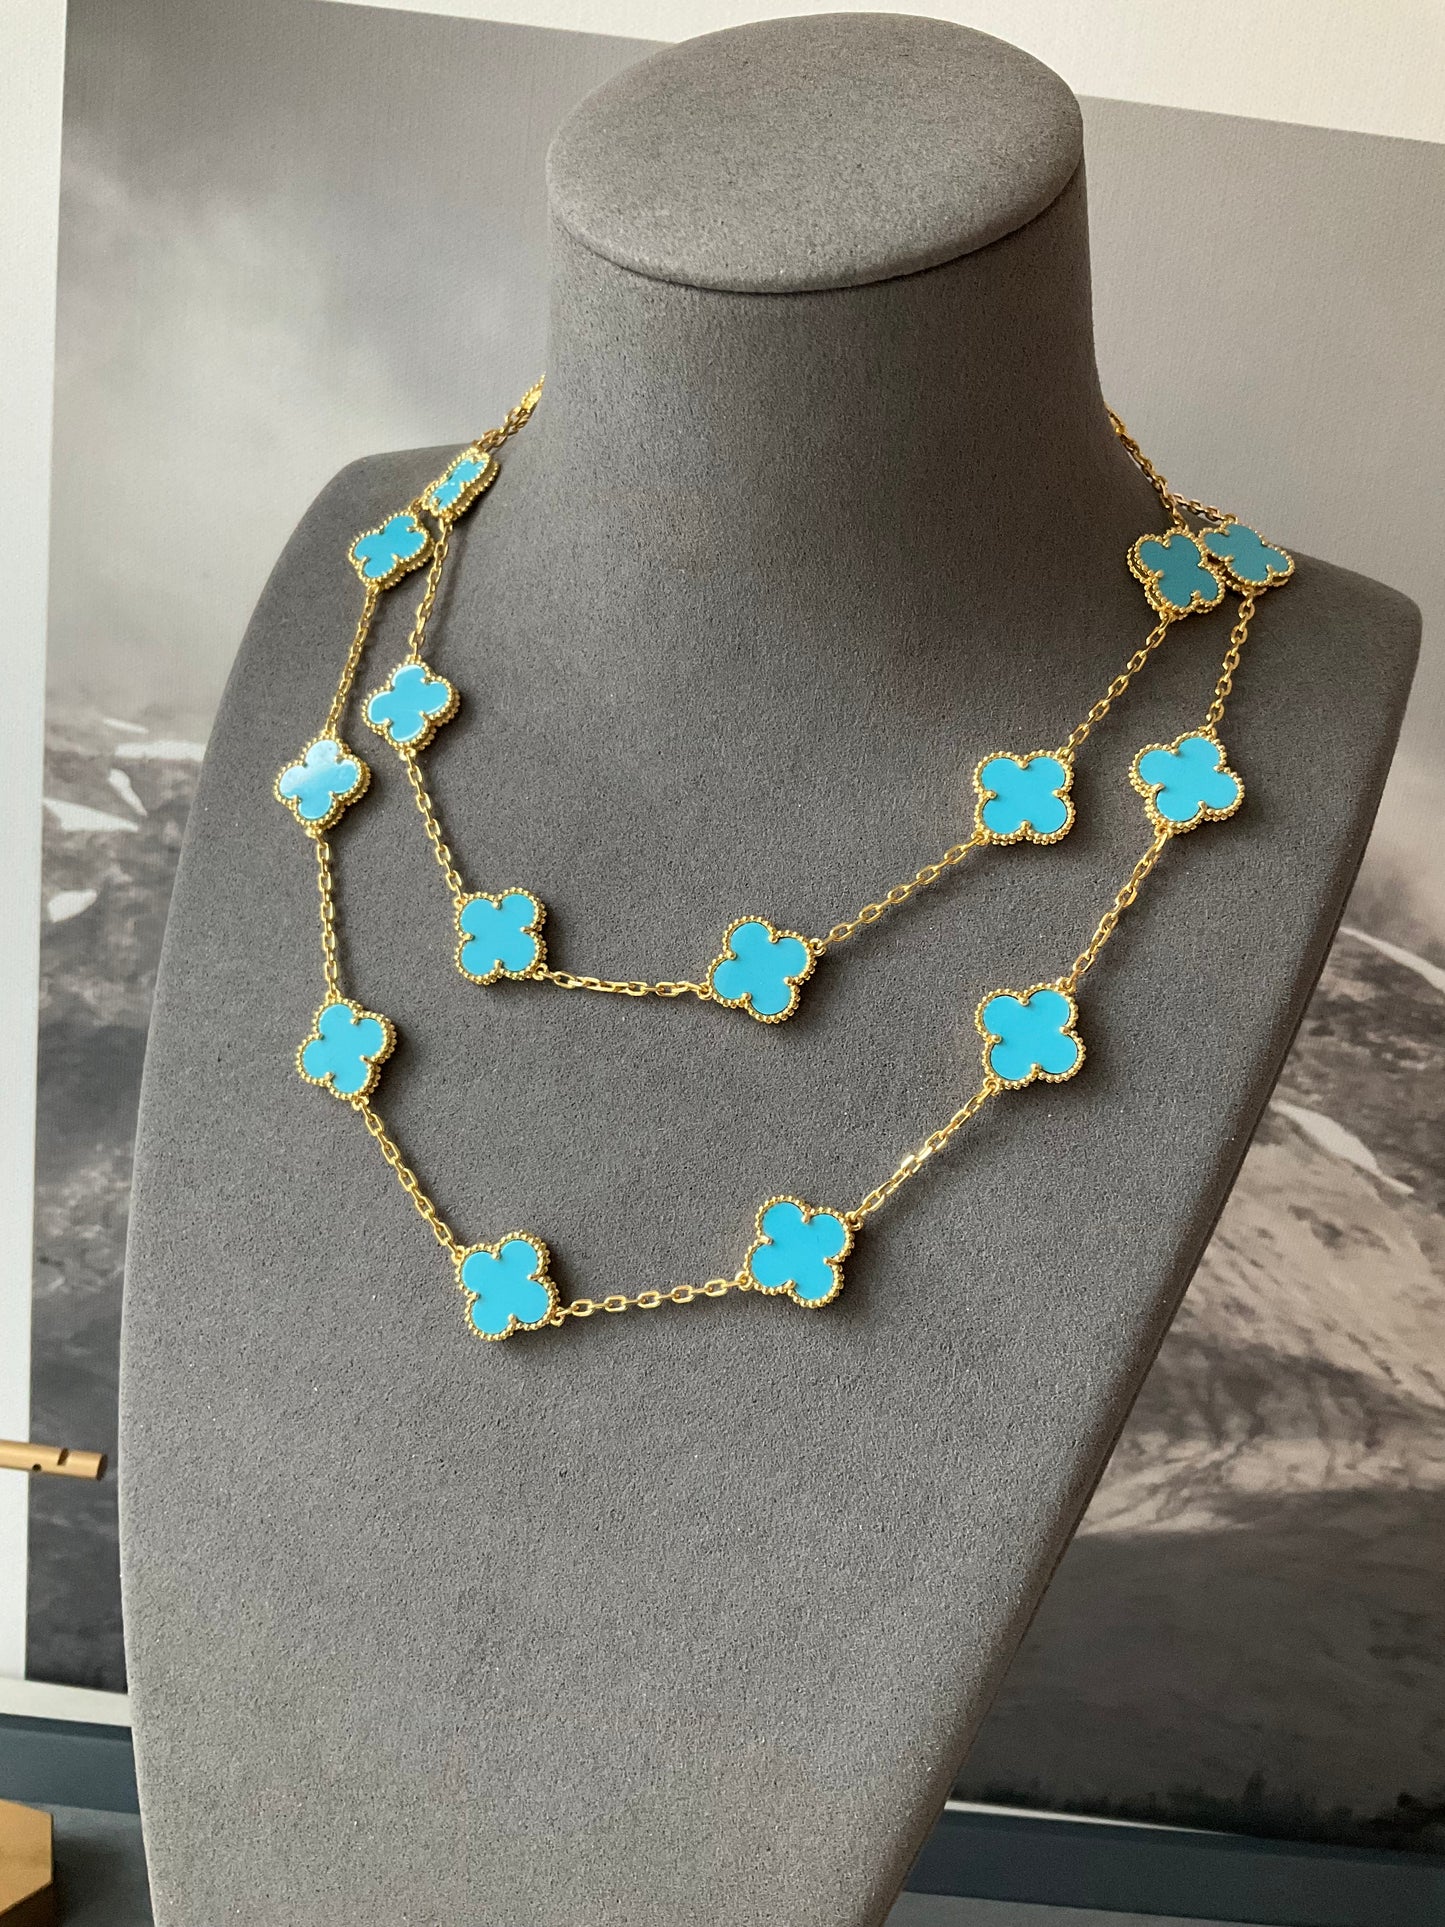 20 motifs Turquoise Gold Plated Four Leaf Clover Flower Style S 925 Silver Necklace 84cm - ParadiseKissCo